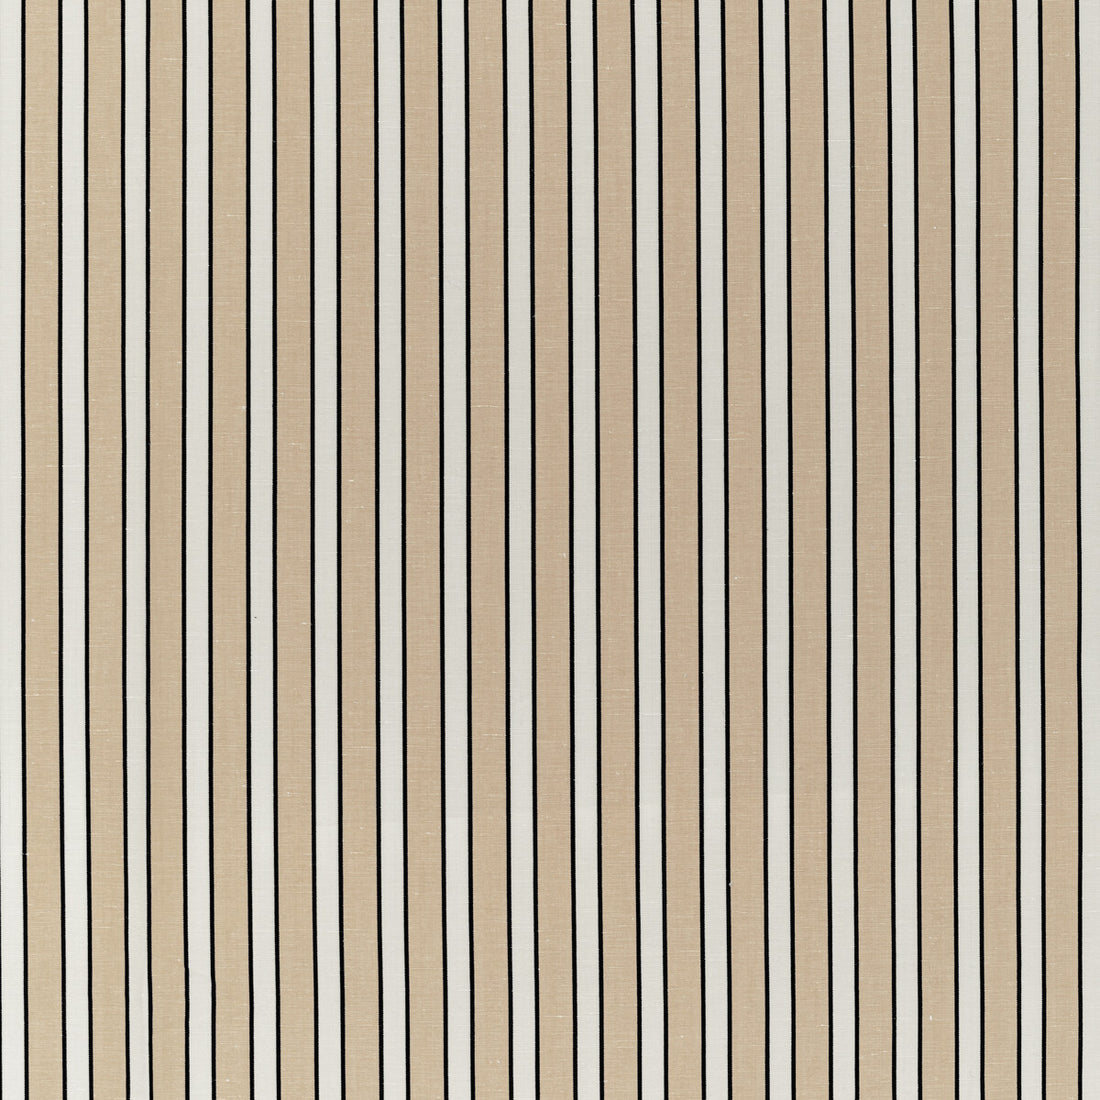 Rouen Stripe fabric in beige color - pattern 8022117.168.0 - by Brunschwig &amp; Fils in the Normant Checks And Stripes II collection